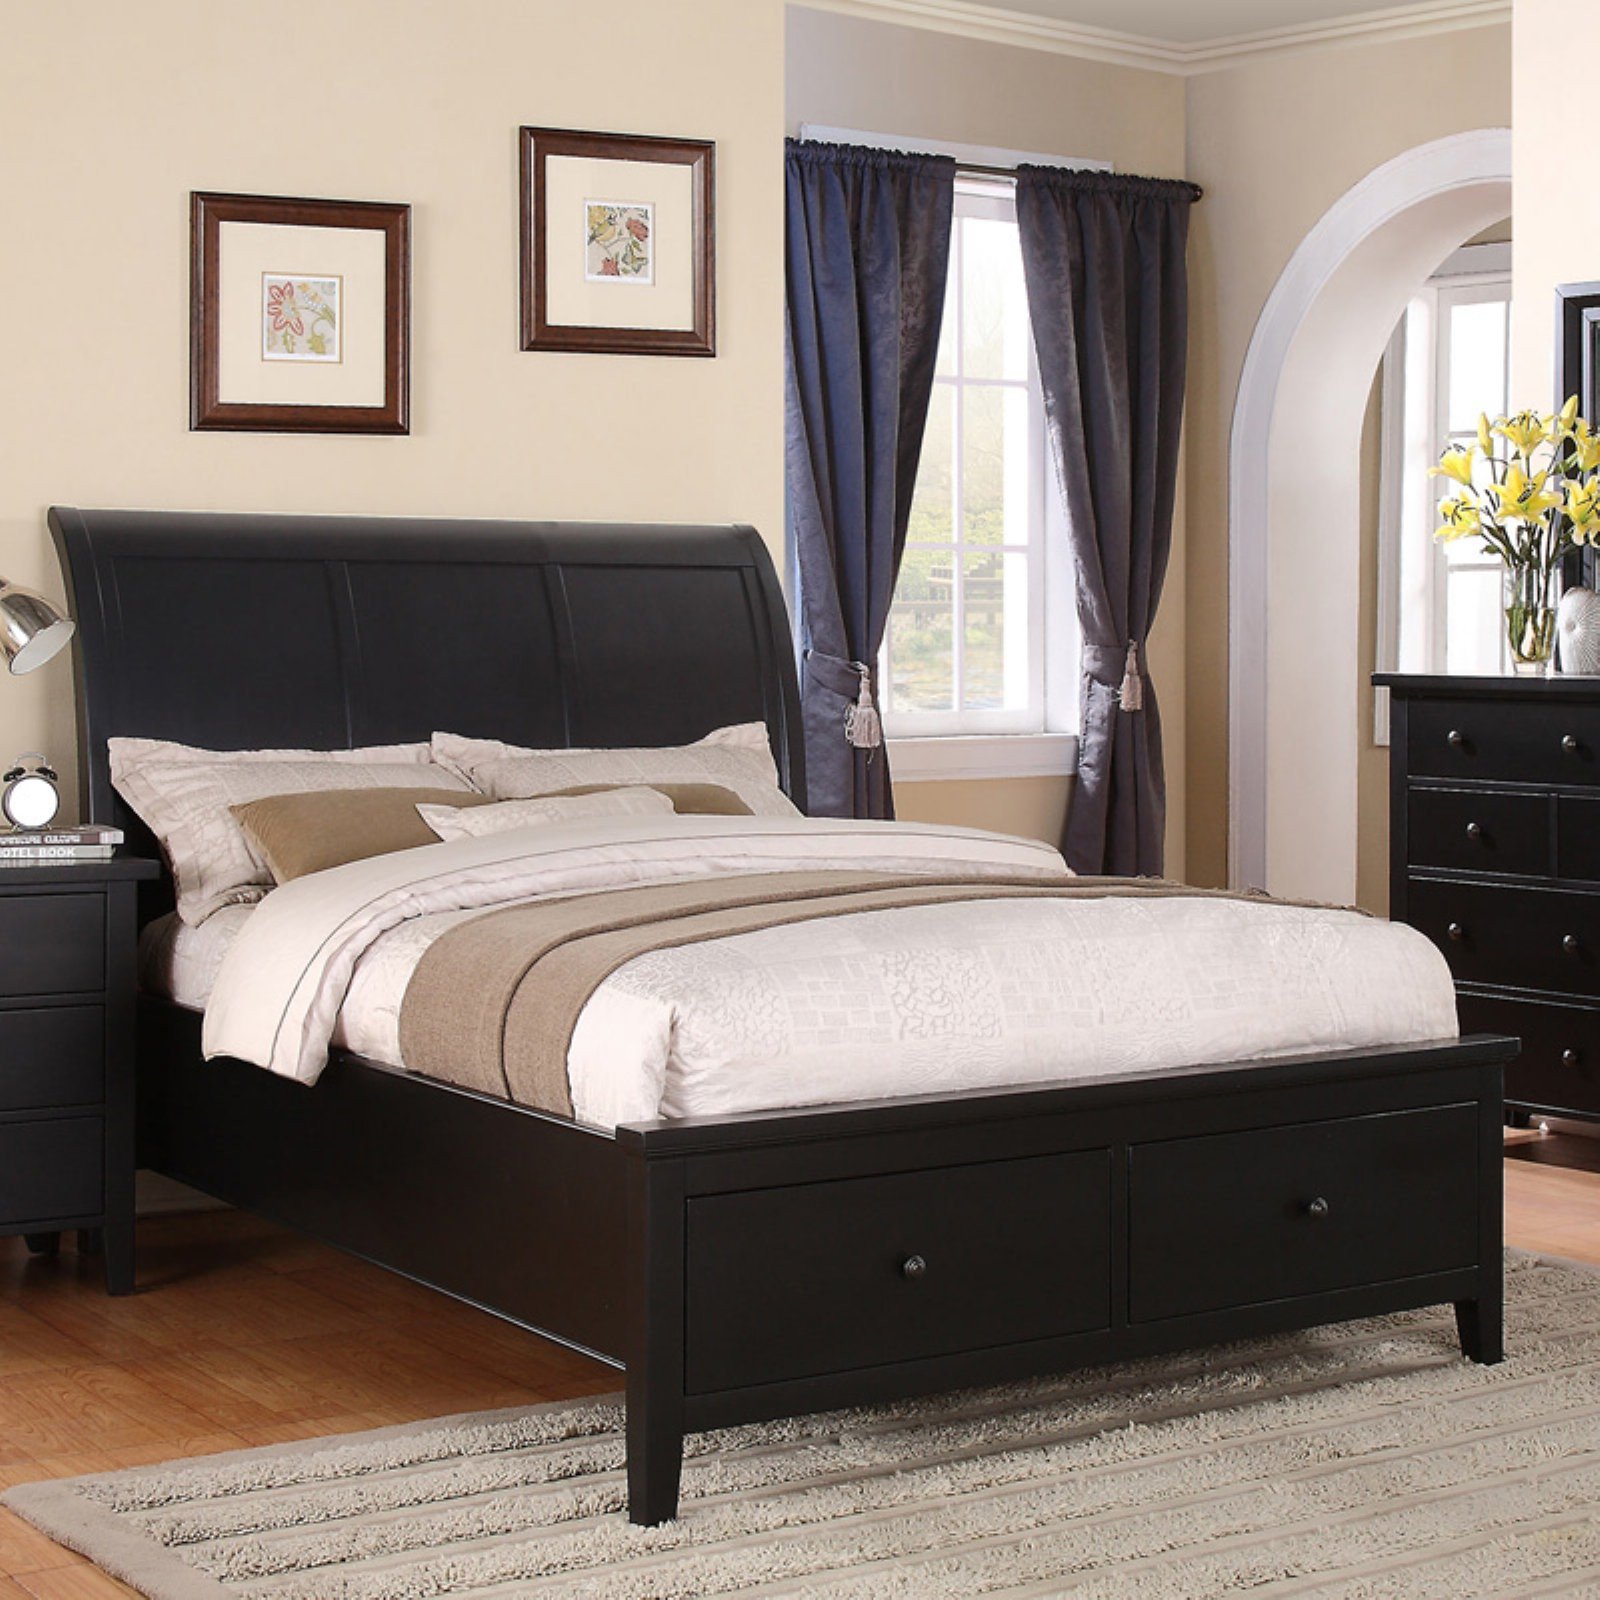 Full Size Bedroom Suite Luxury Winners Ly Vintage Storage Sleigh Bed Size Queen